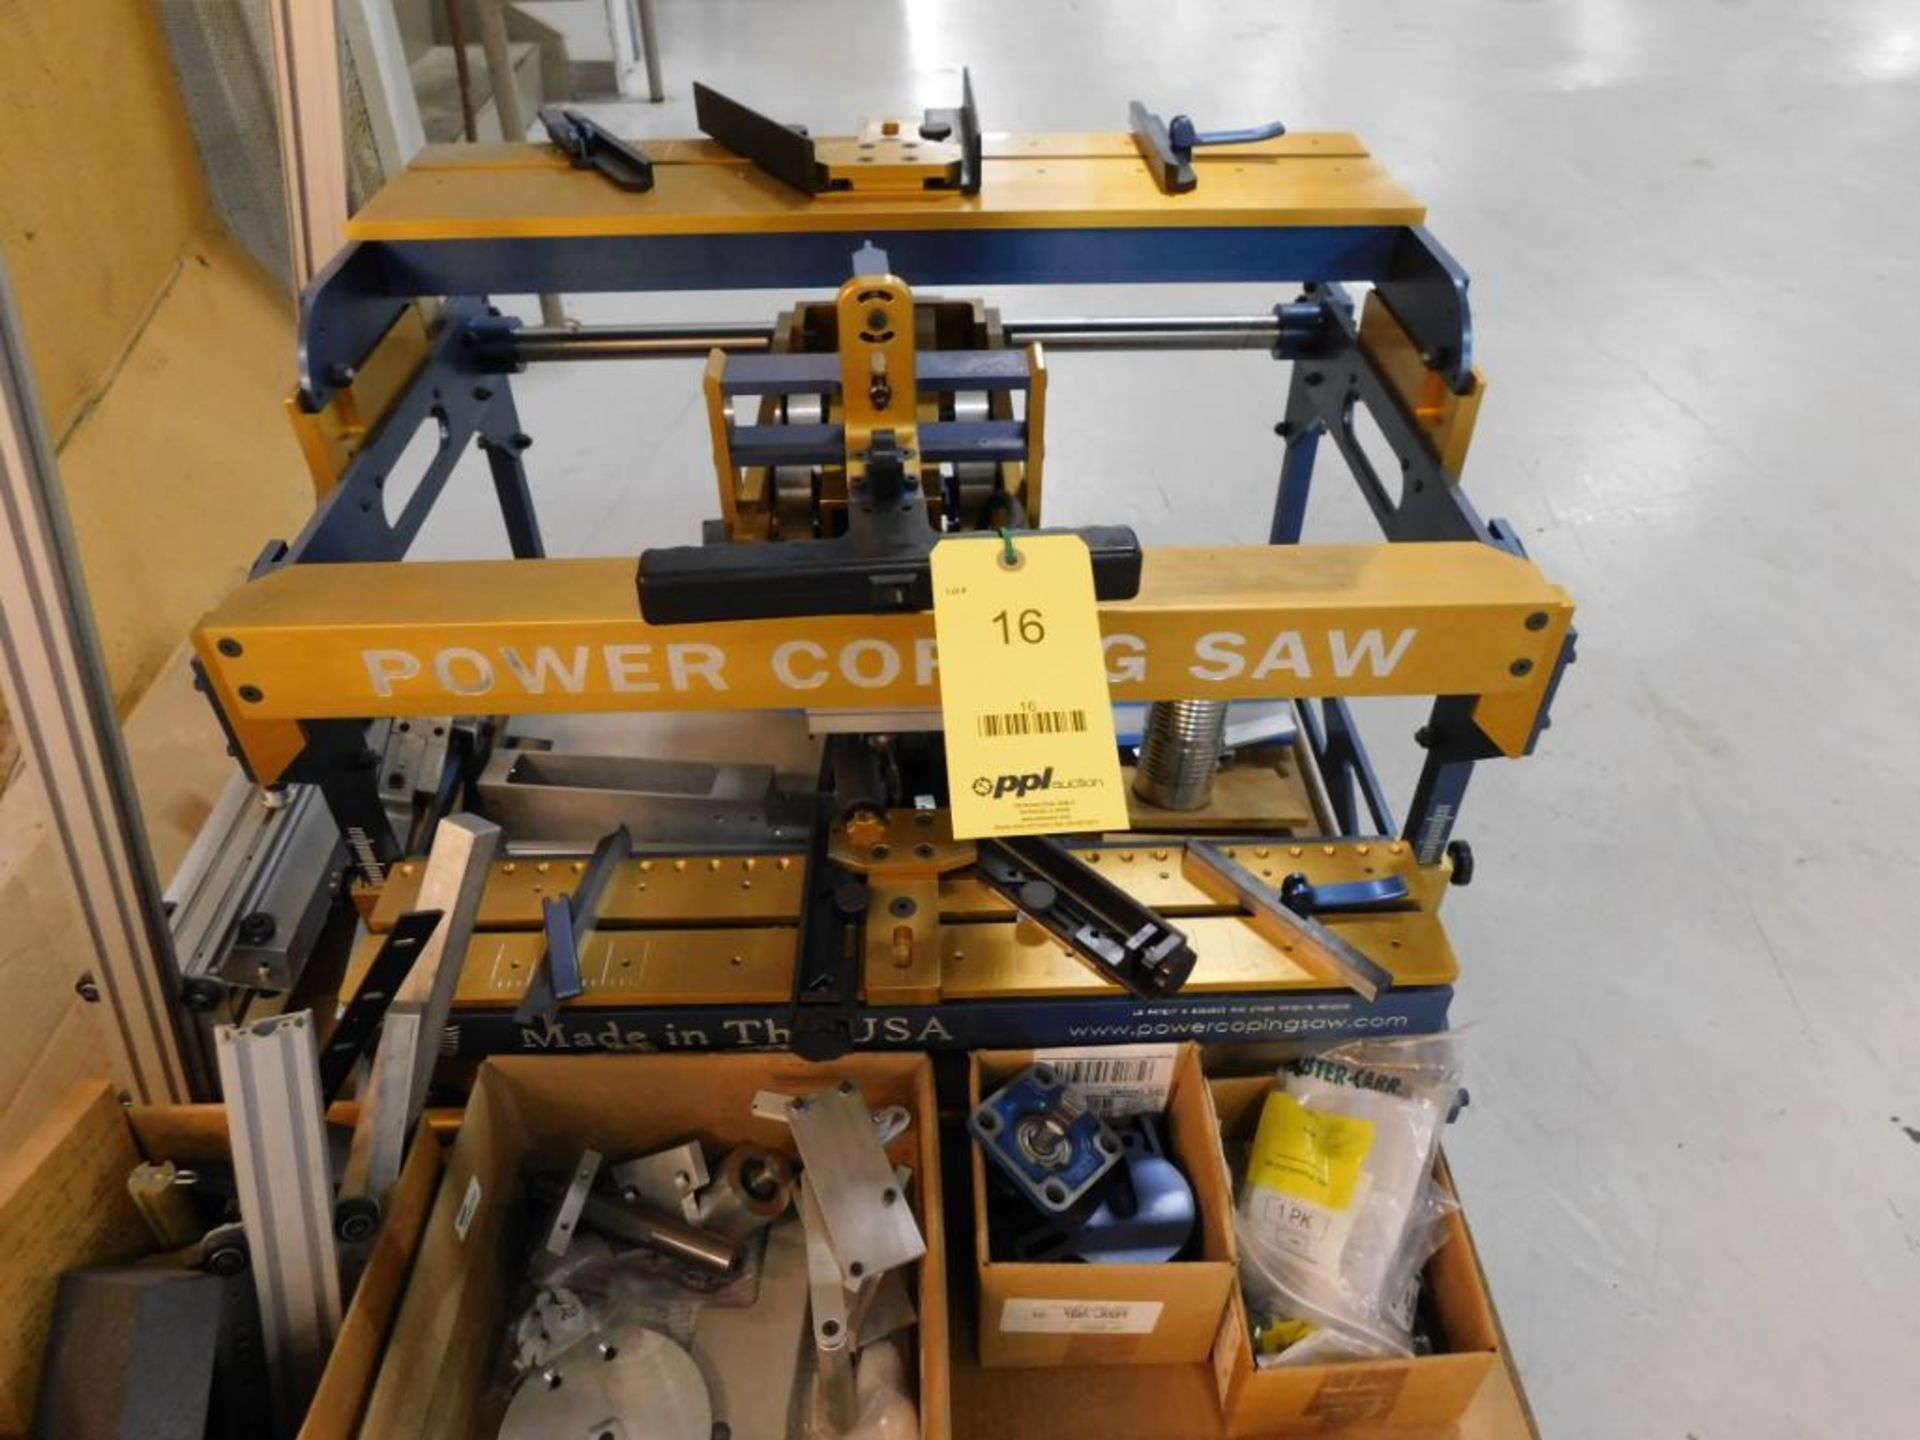 Power Coping Saw, Saw and Accessories - Made in USA